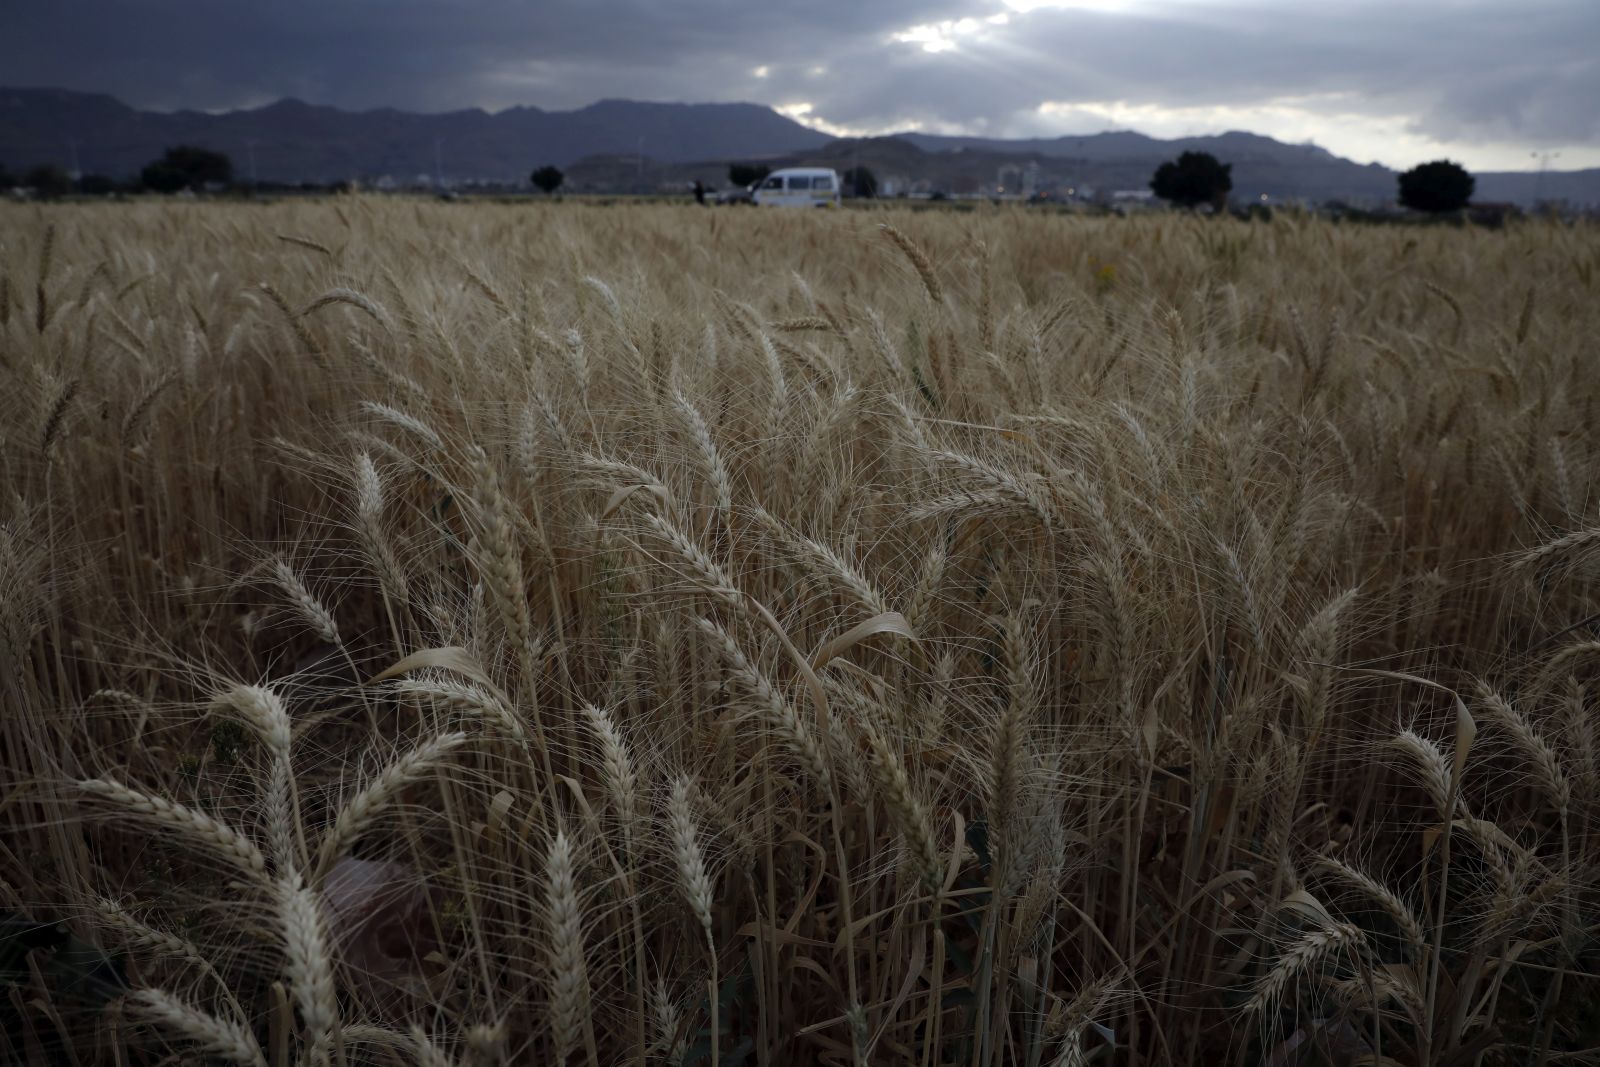 epa10263774 A field of wheat shortly before a harvest season, in Sana'a, Yemen, 24 October 2022. Yemen’s total wheat production contributes less than 10 percent of all utilization needs while its agriculture sector contributes about 17 percent of real GDP in 2022, the Houthis-held agricultural authority has reported. War-ravaged Yemen imports more than 3.8 million tonnes of wheat a year, including around 45 percent of its wheat needs came from Ukraine and Russia.  EPA/YAHYA ARHAB